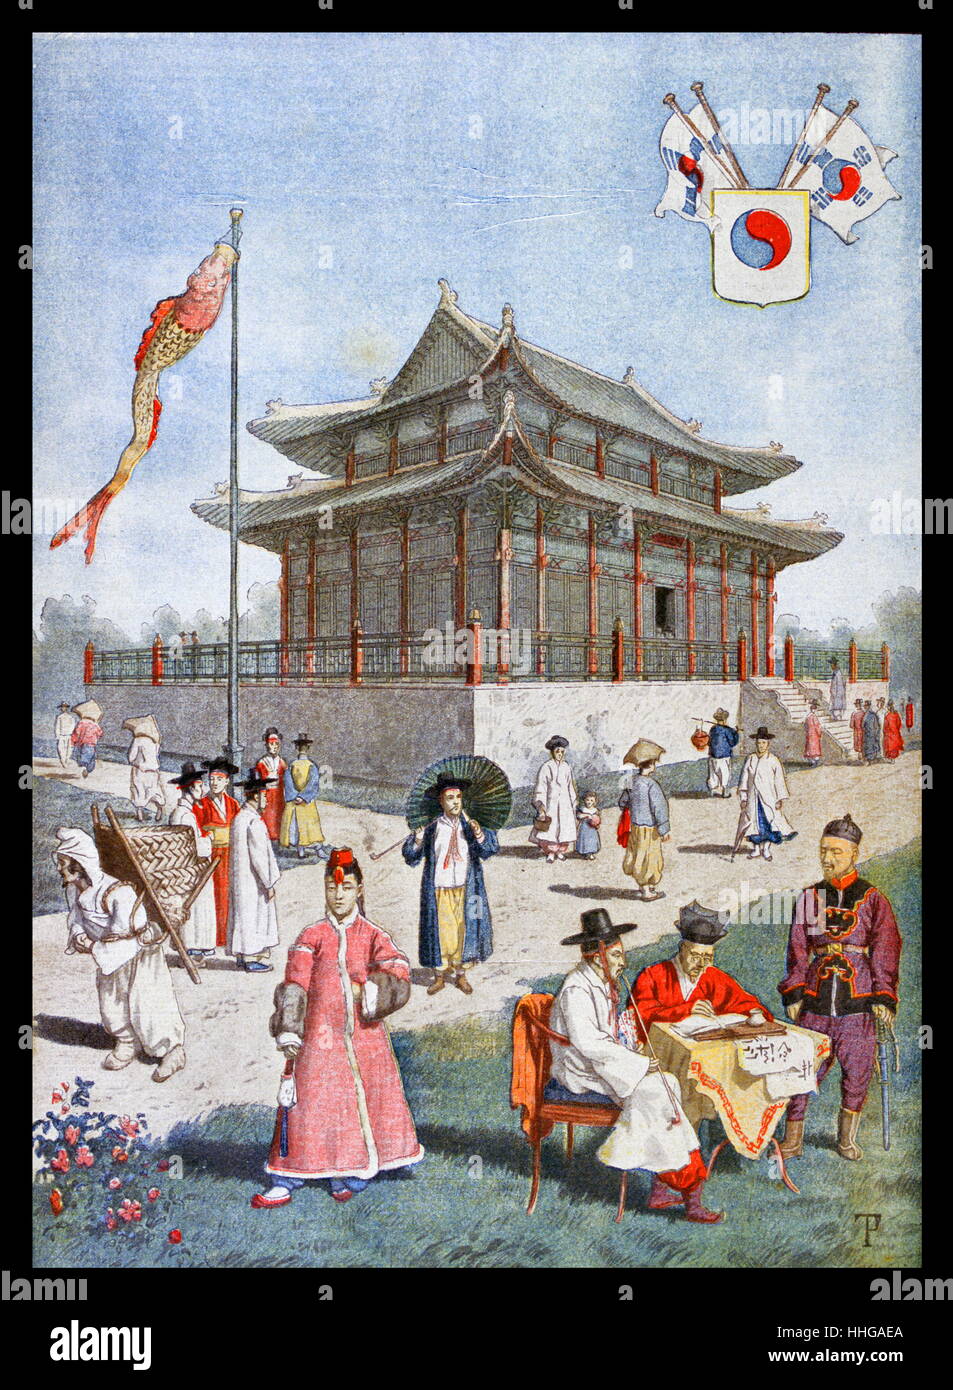 Korean Pavilion at the Exposition Universelle of 1900. This was a fair held in Paris, France, from 14 April to 12 November 1900, to celebrate the achievements of the past century and to accelerate development into the next. Stock Photo